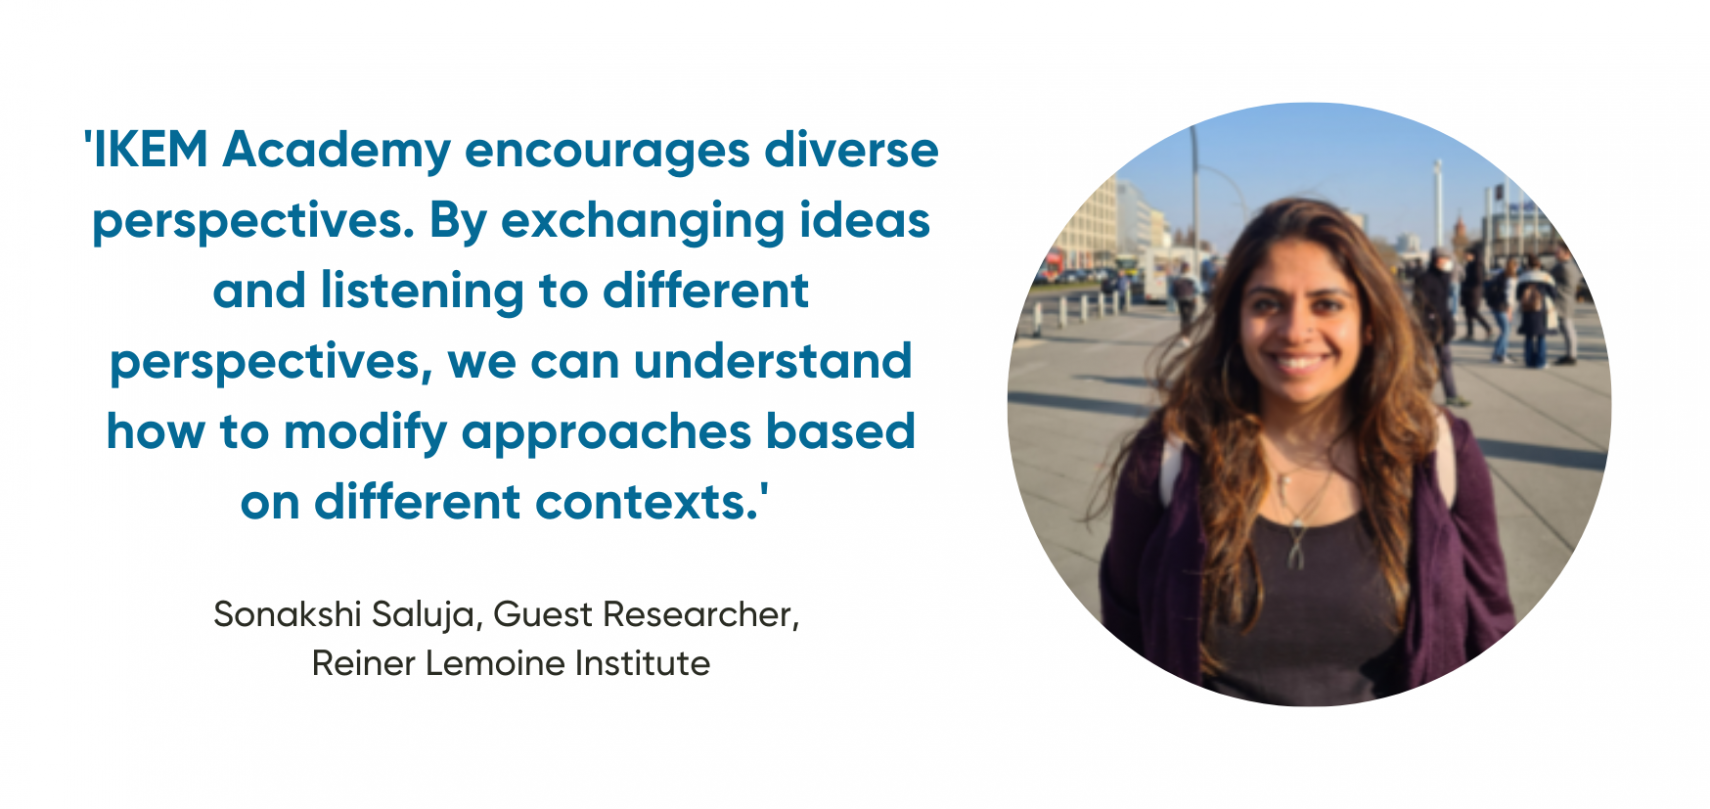 'IKEM Academy encourages diverse perspectives. By exchanging ideas and listening to different perspectives, we can understand how to  modify approaches based on  different contexts.'   Sonakshi Saluja, Guest Researcher,  Reiner Lemoine Institute